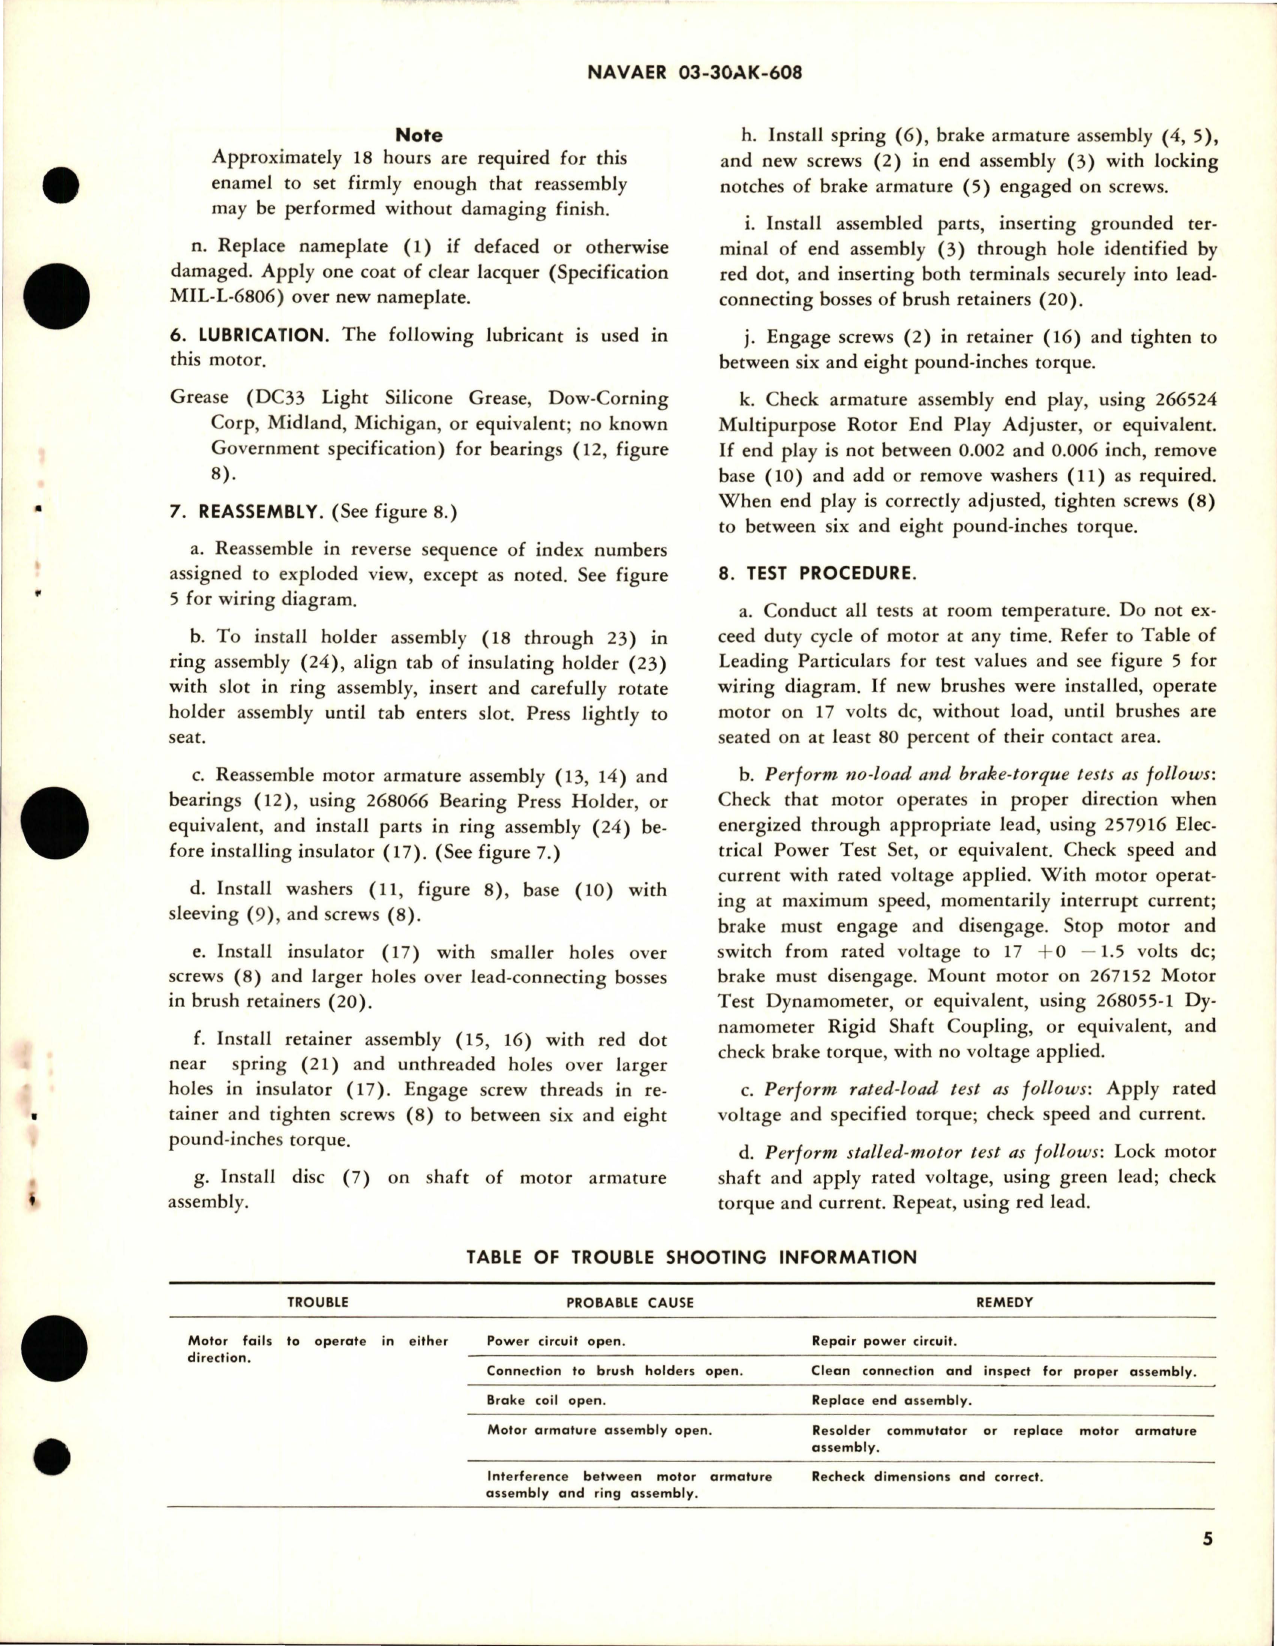 Sample page 5 from AirCorps Library document: Overhaul Instructions with Parts Breakdown for Direct-Current Motor - Part 36846 